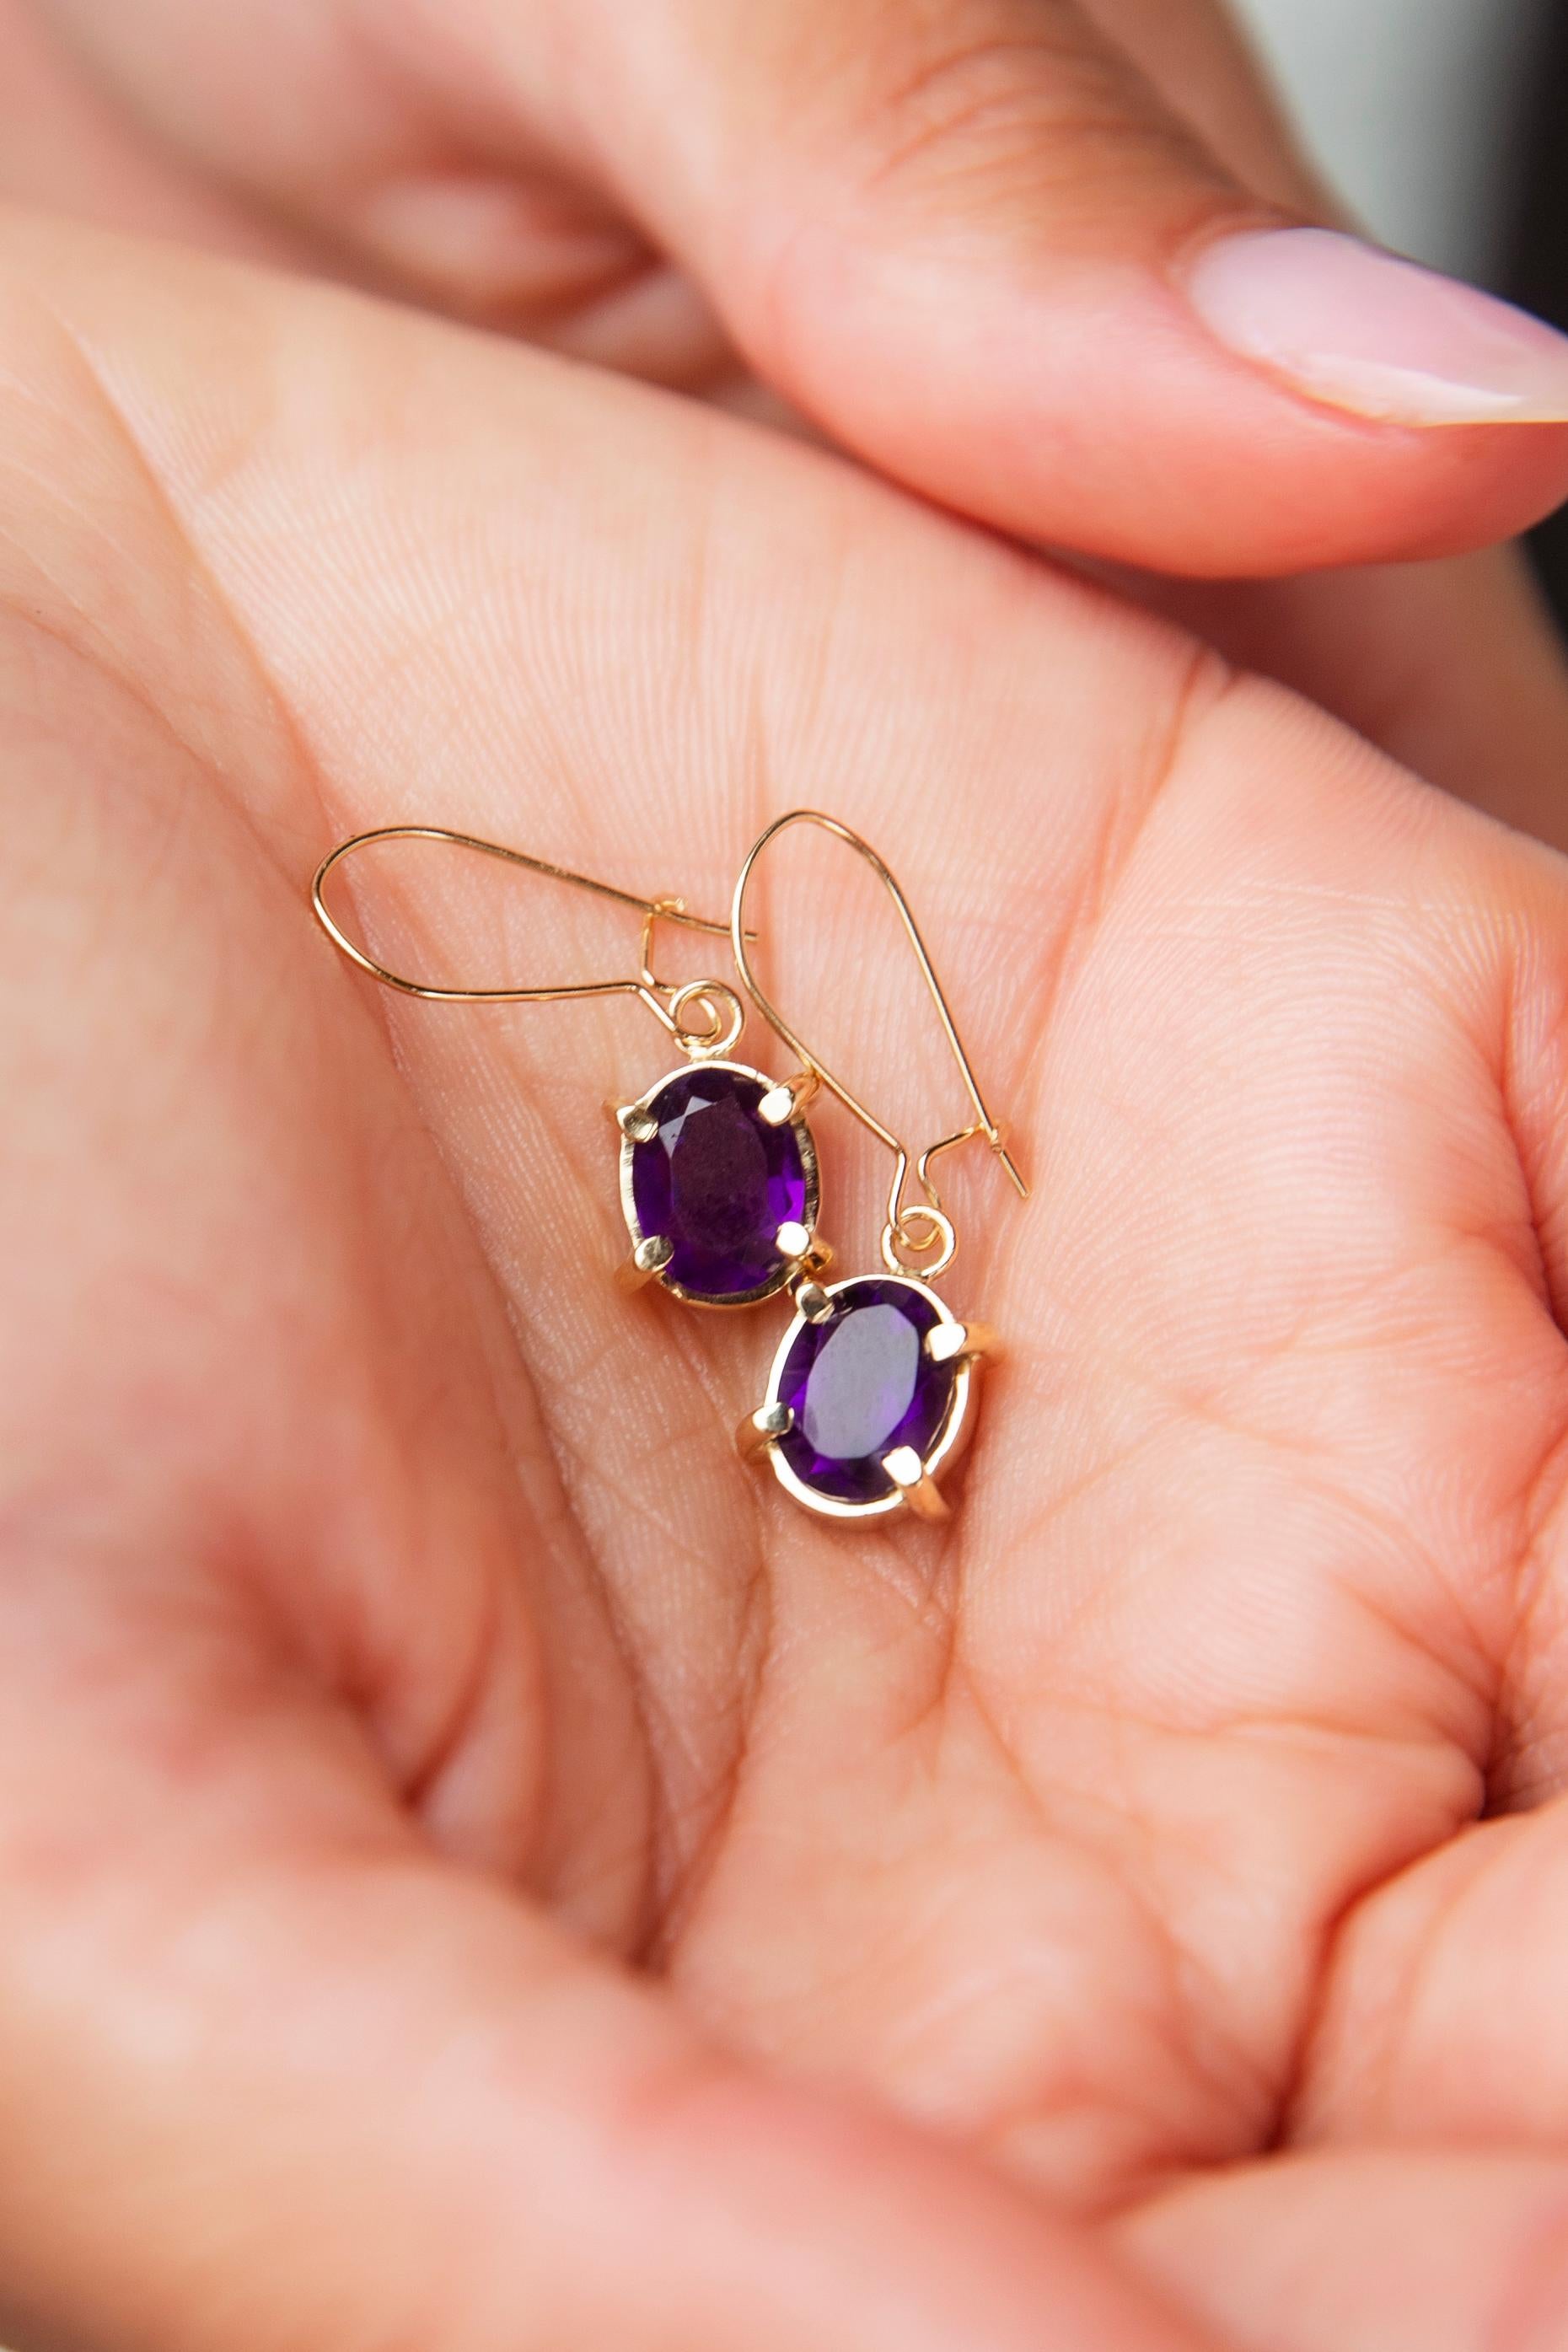 Crafted in 18 carat yellow gold, these vintage drop earrings, circa 1990s, each feature a lovely oval cut purple amethyst in a claw setting and are finished with continental hook backings for easy and comfortable wear. We have named these adorable